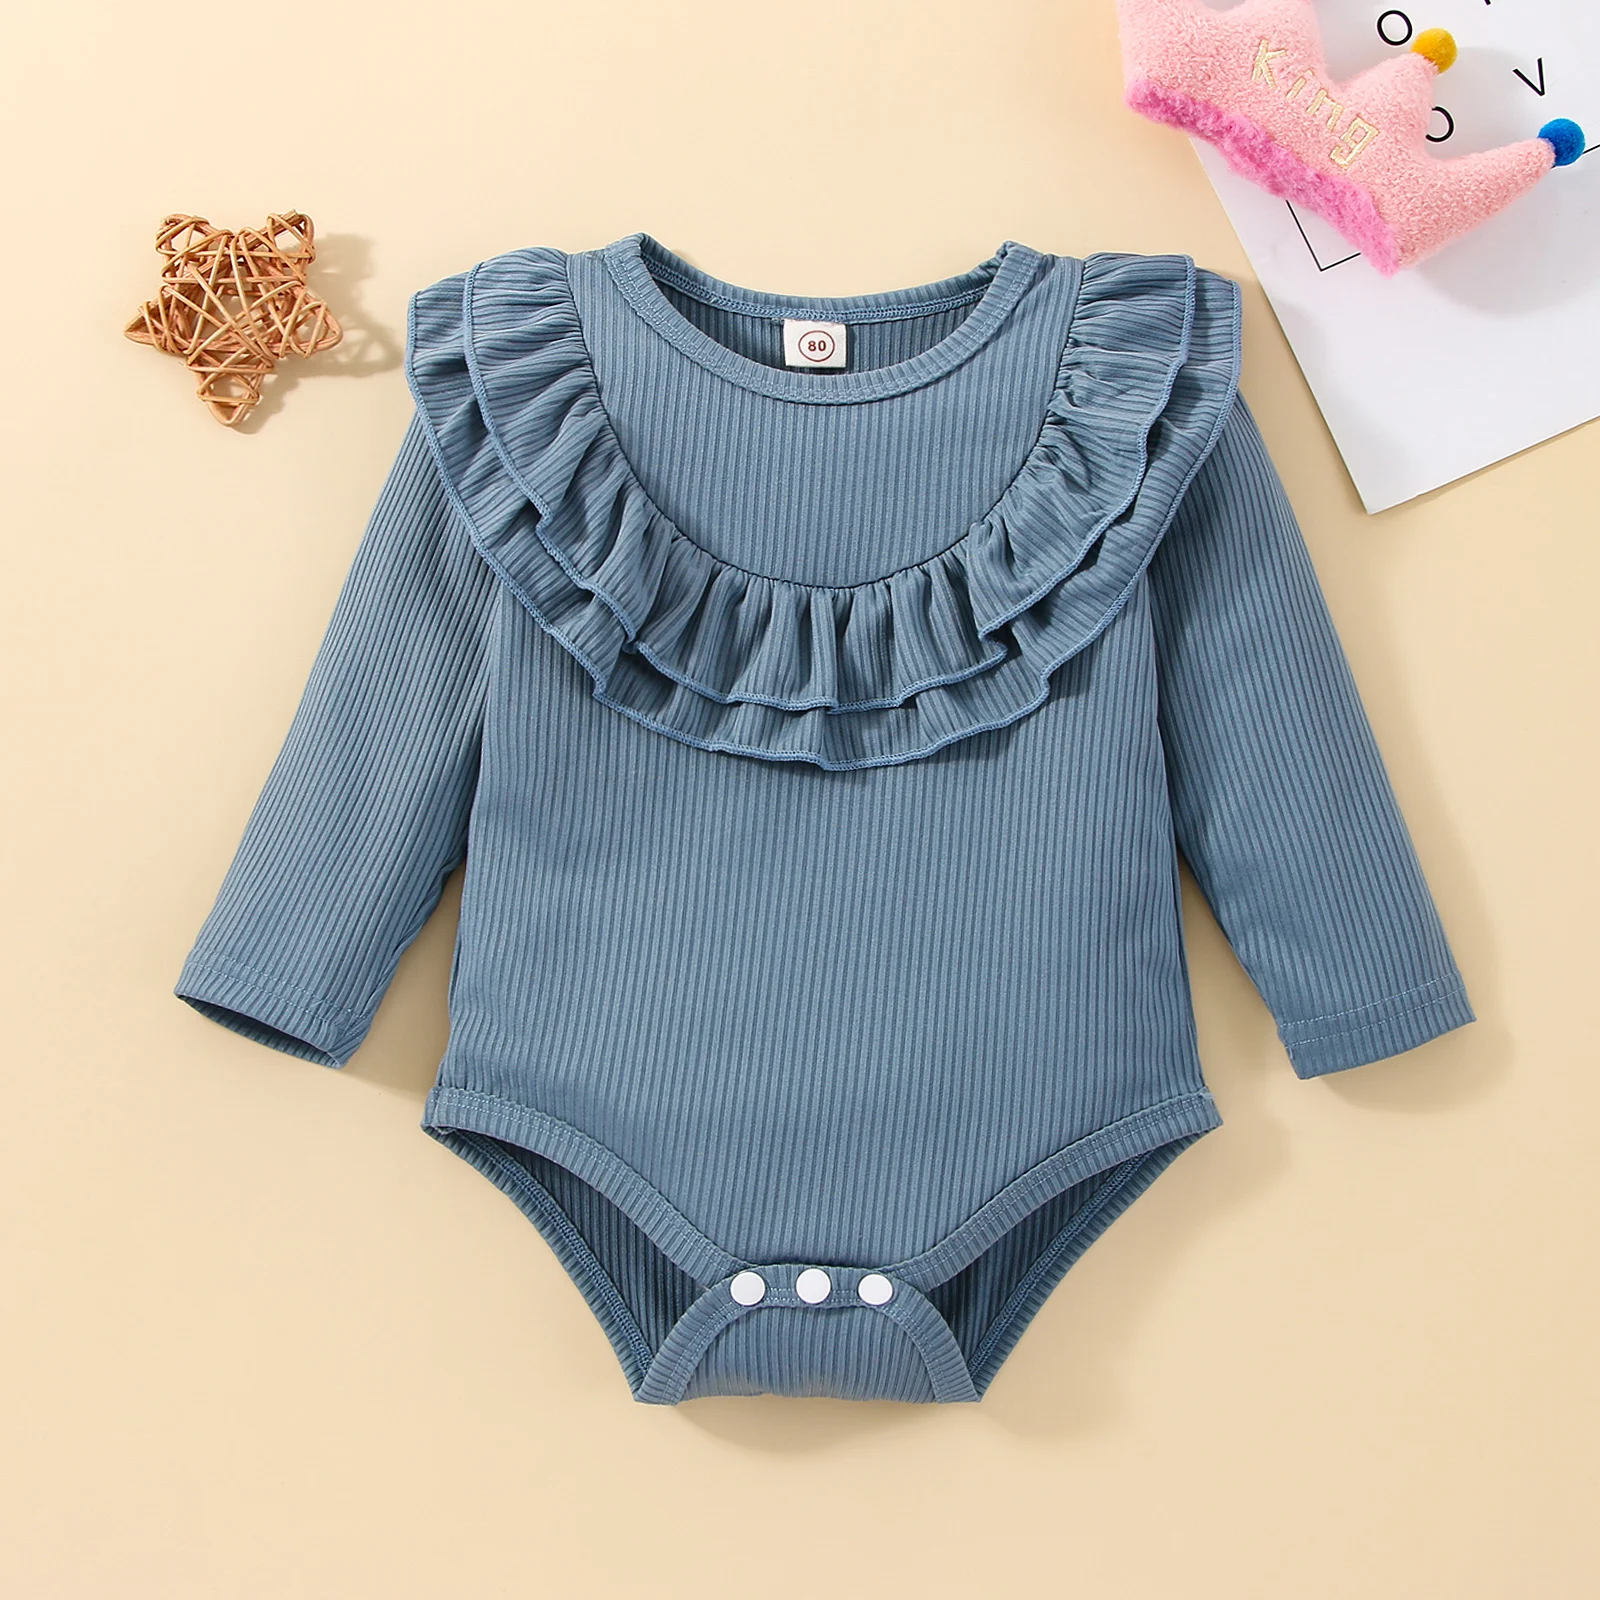 Ma&Baby 3-24M Newborn Infant Baby Girl Romper Knit Soft Long Sleeve Ruffle Jumpsuit Spring Autumn Toddler Girls Clothing D01